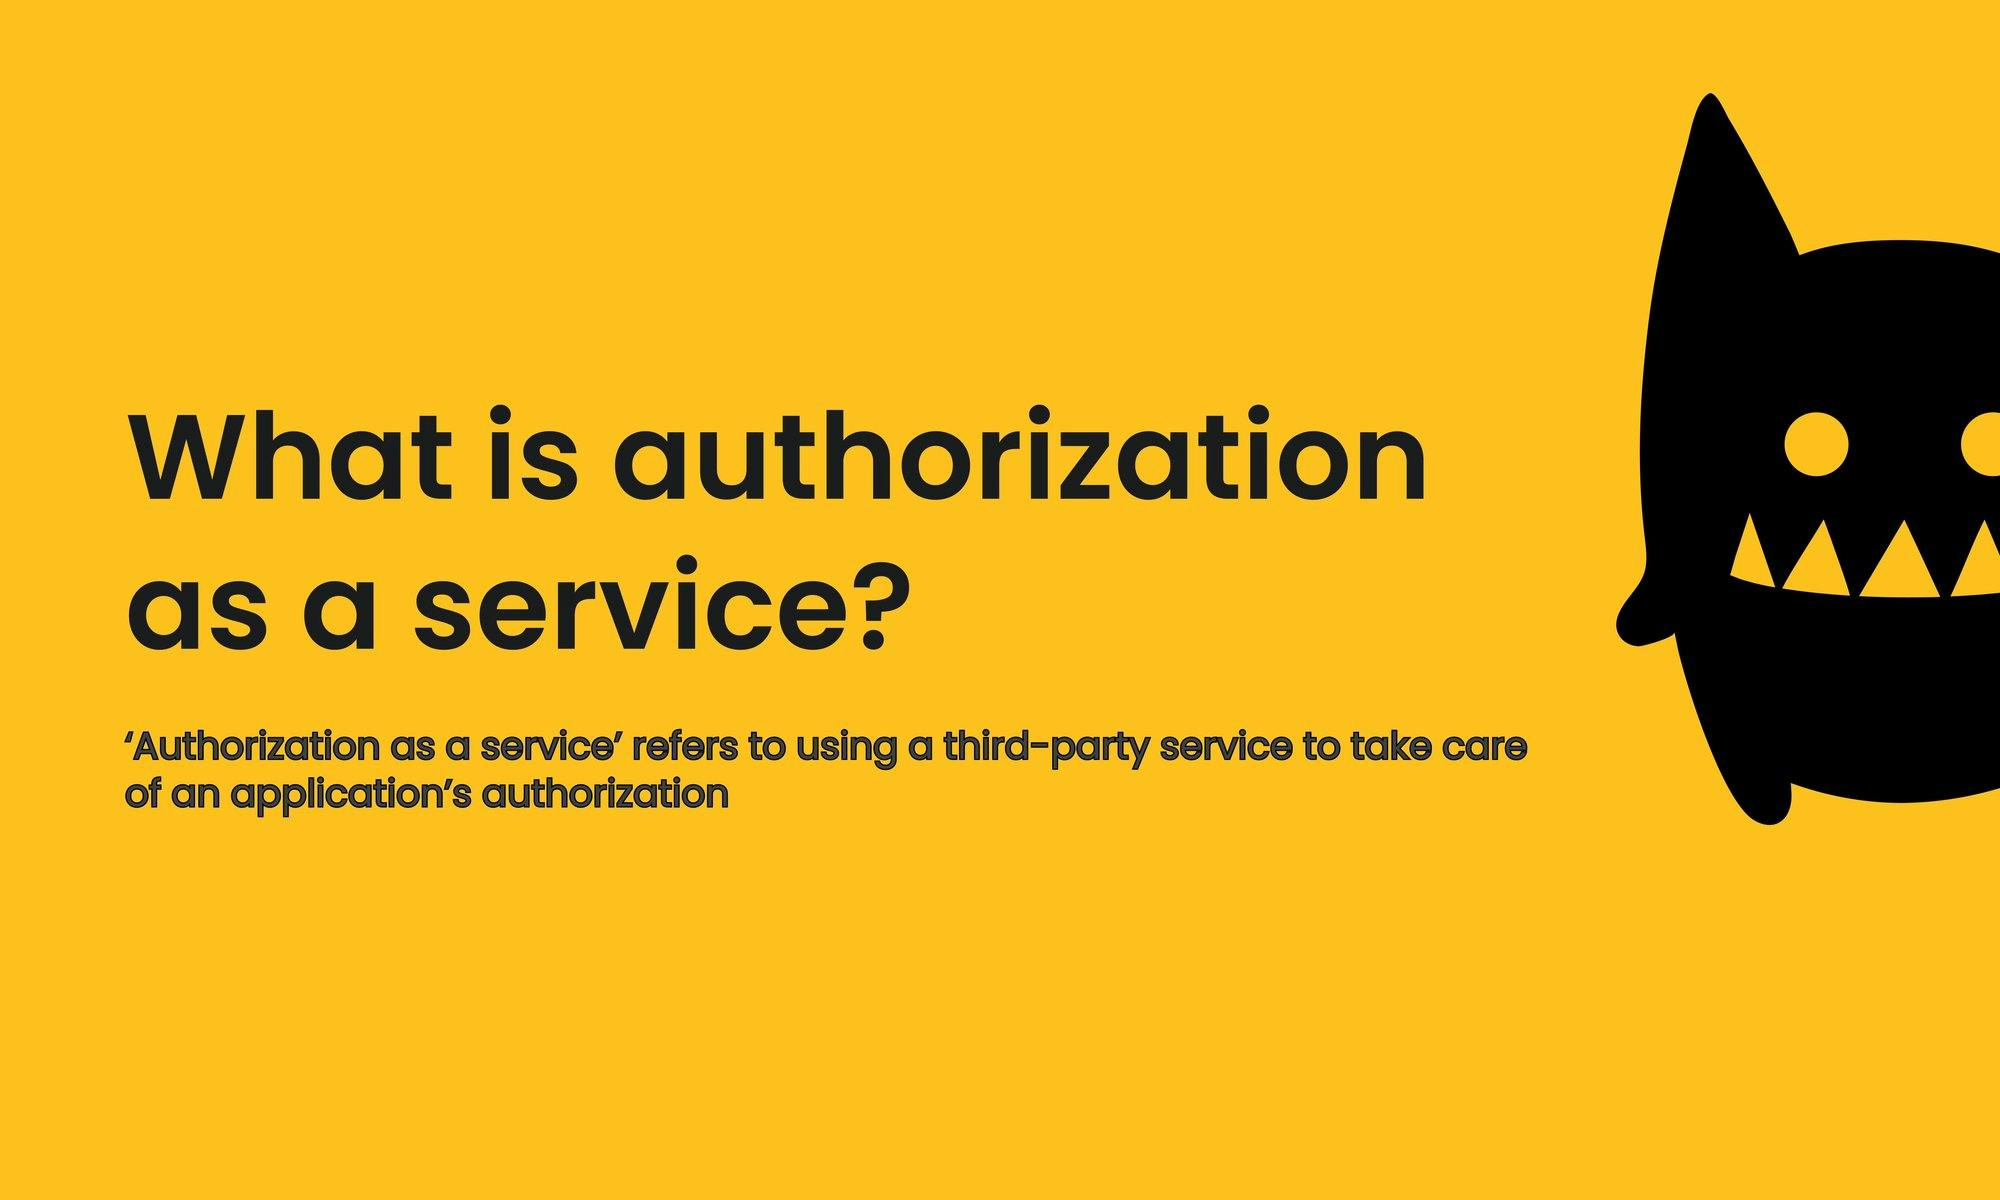 What is authorization as a service?